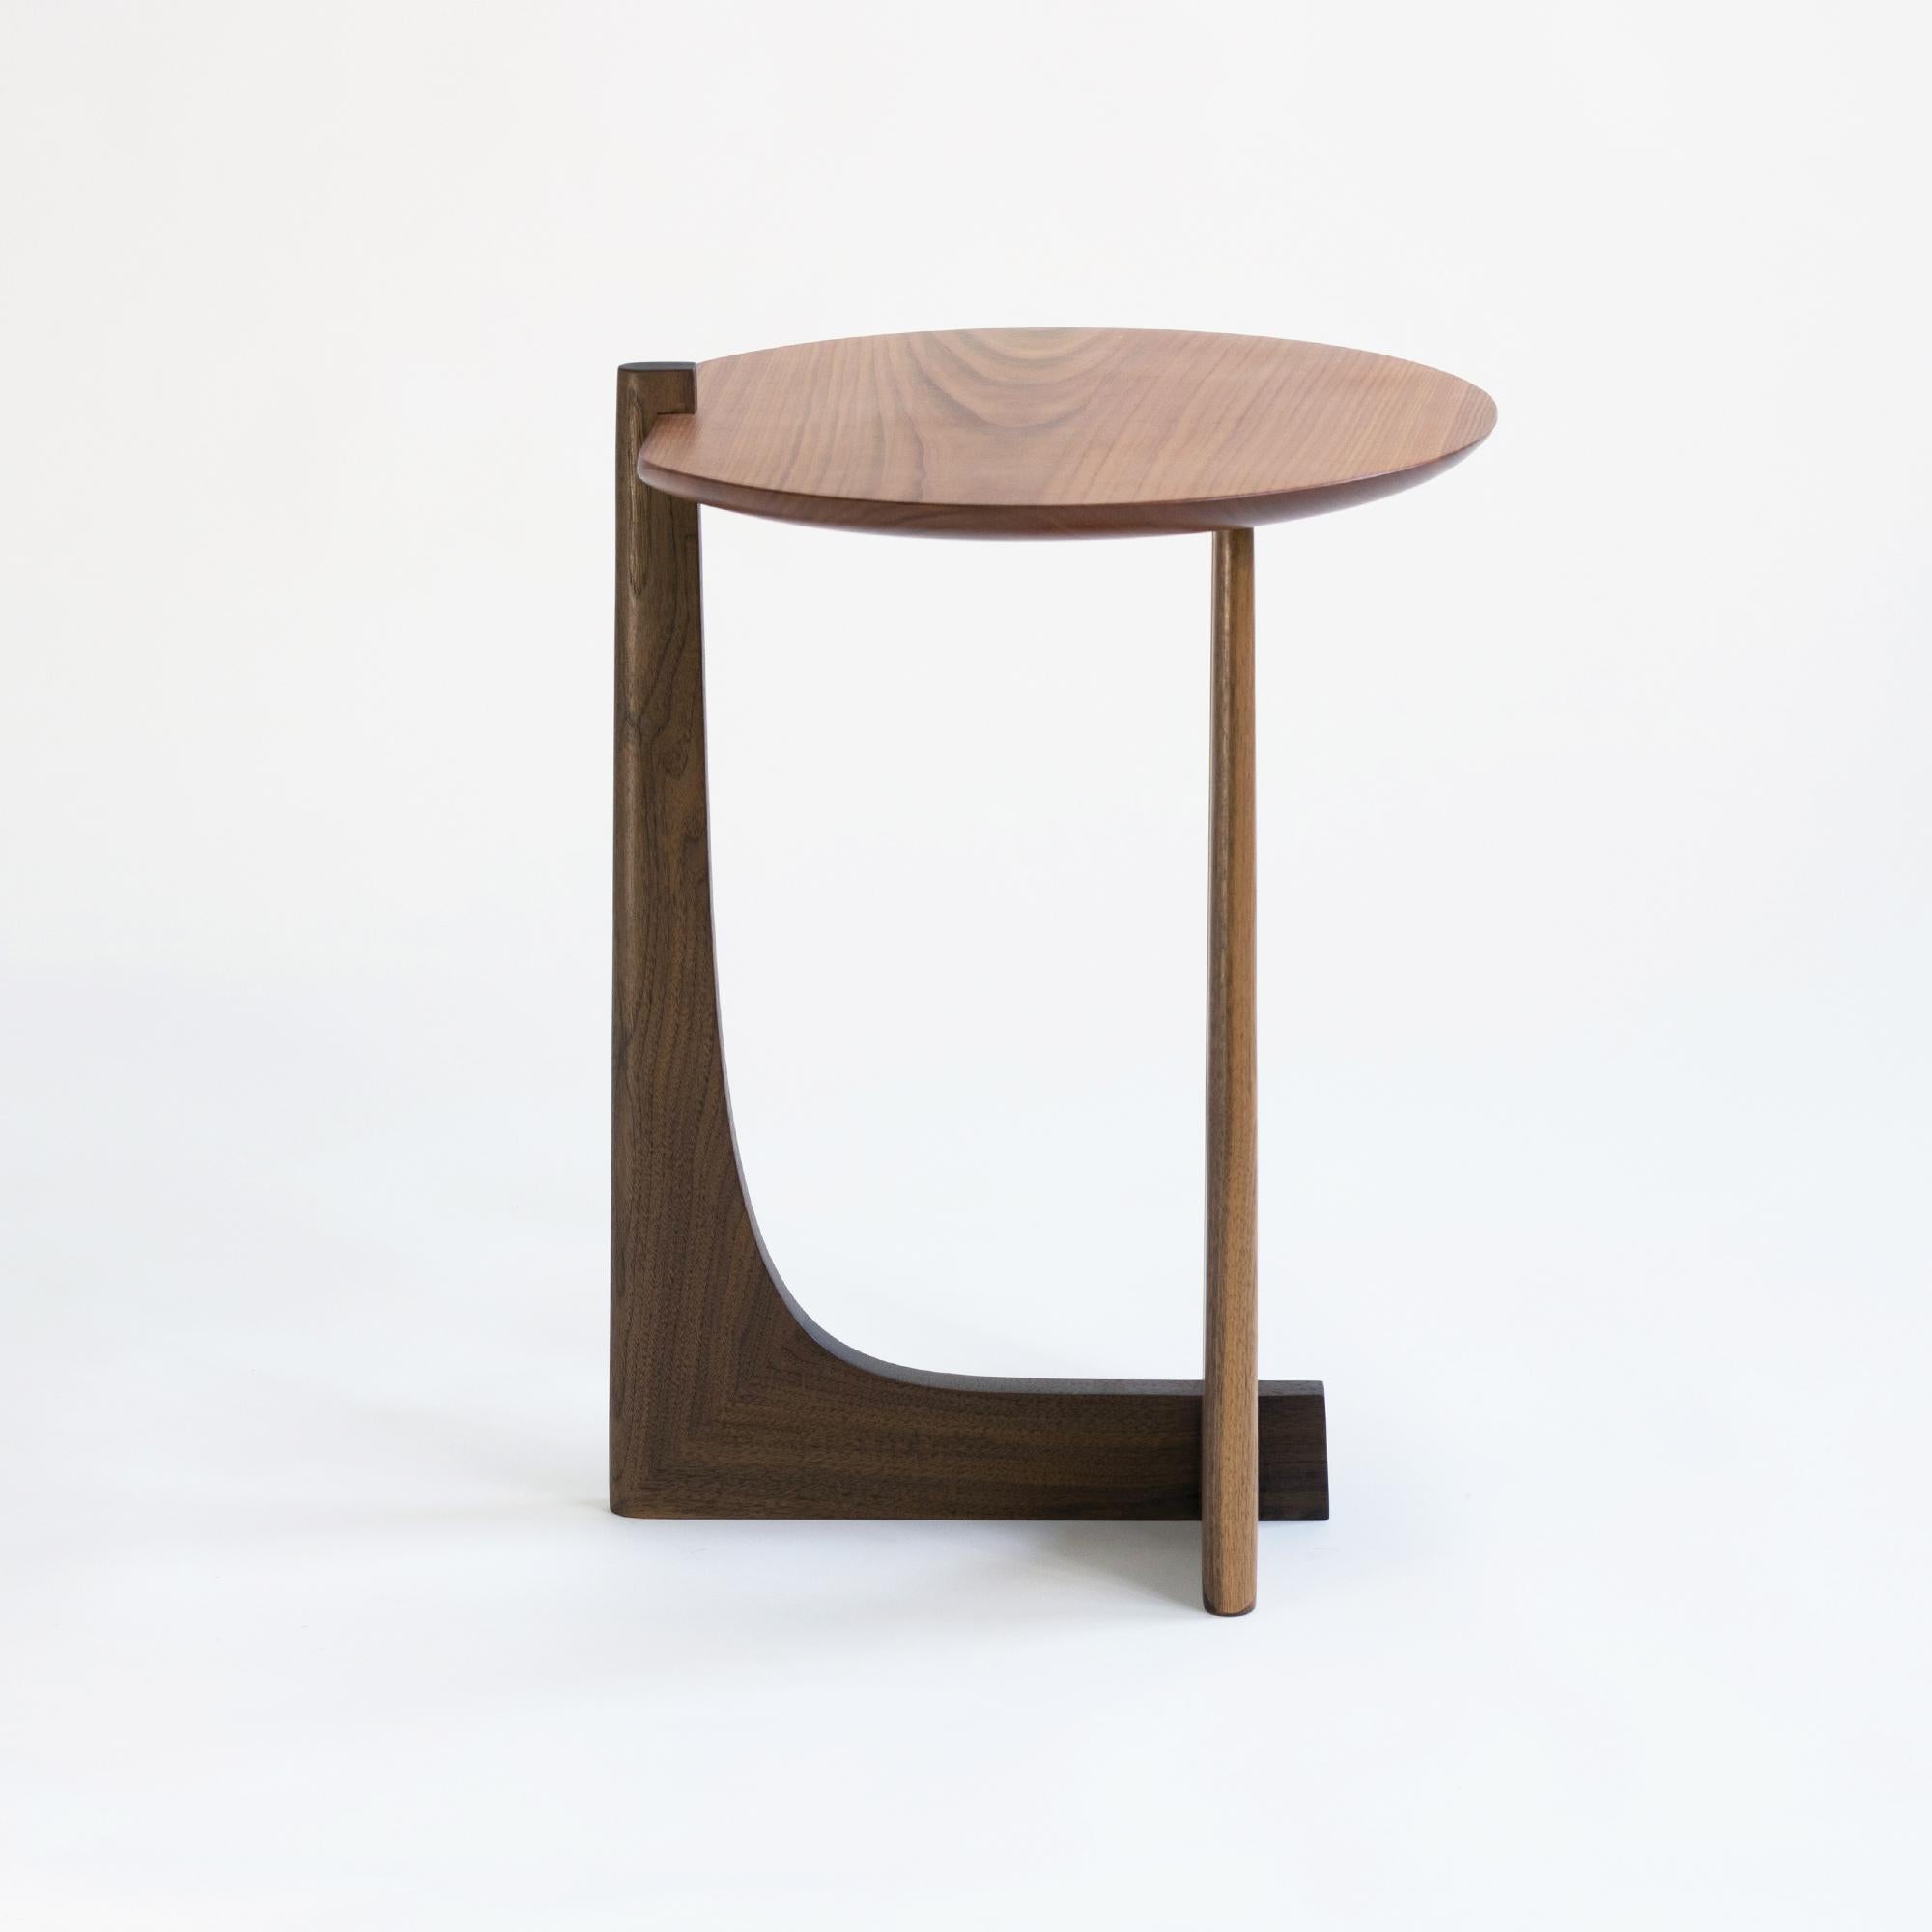 The first piece that Diaform started with. 3L stands for 3 Legged and is a side table that has gone through several iterations. The 3L displays a stricter language, but summarizes a lot of the base curves that Diaform works with. A piece that is